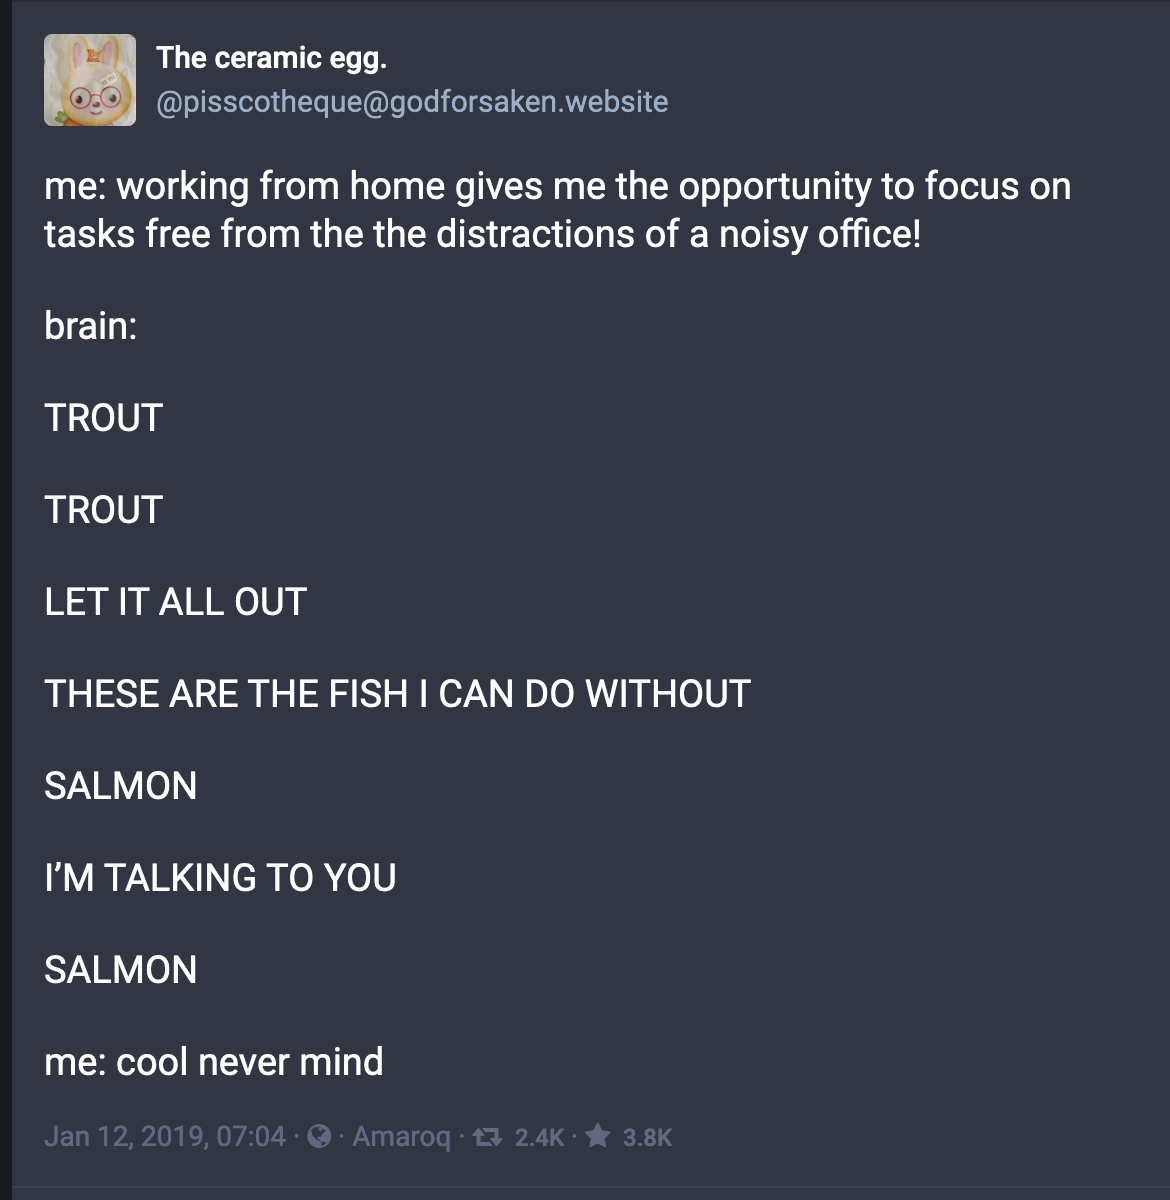 "Screenshot of a mastodon post that says:
me: working from home gives me the opportunity to focus on tasks free from the the distractions of a noisy office!
brain:
TROUT
TROUT
LET IT ALL OUT
THESE ARE THE FISH I CAN DO WITHOUT
SALMON
I’M TALKING TO YOU
SALMON
me: cool never mind"